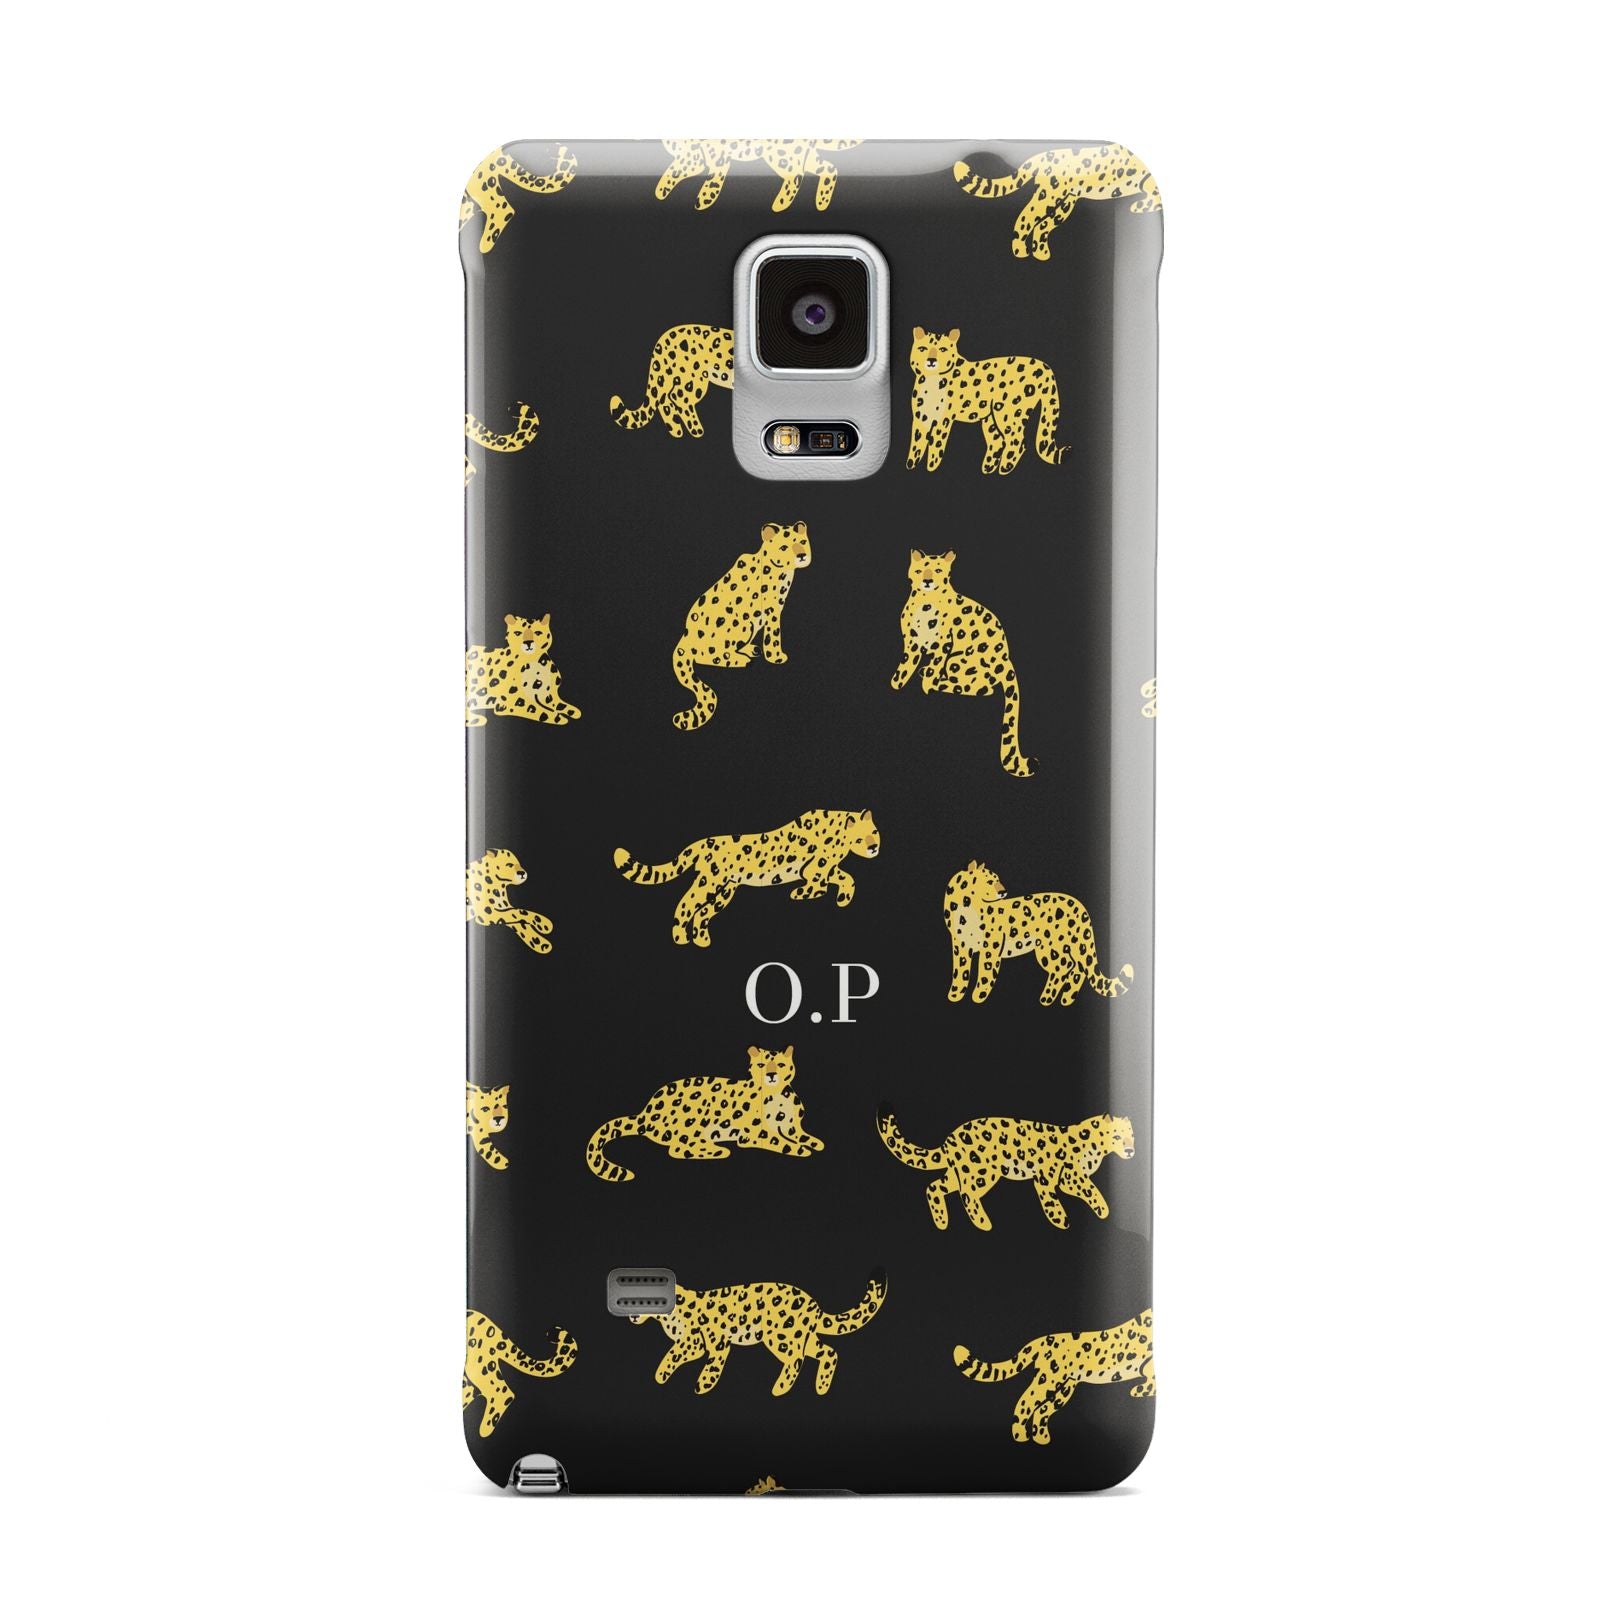 Prowling Leopard Samsung Galaxy Note 4 Case